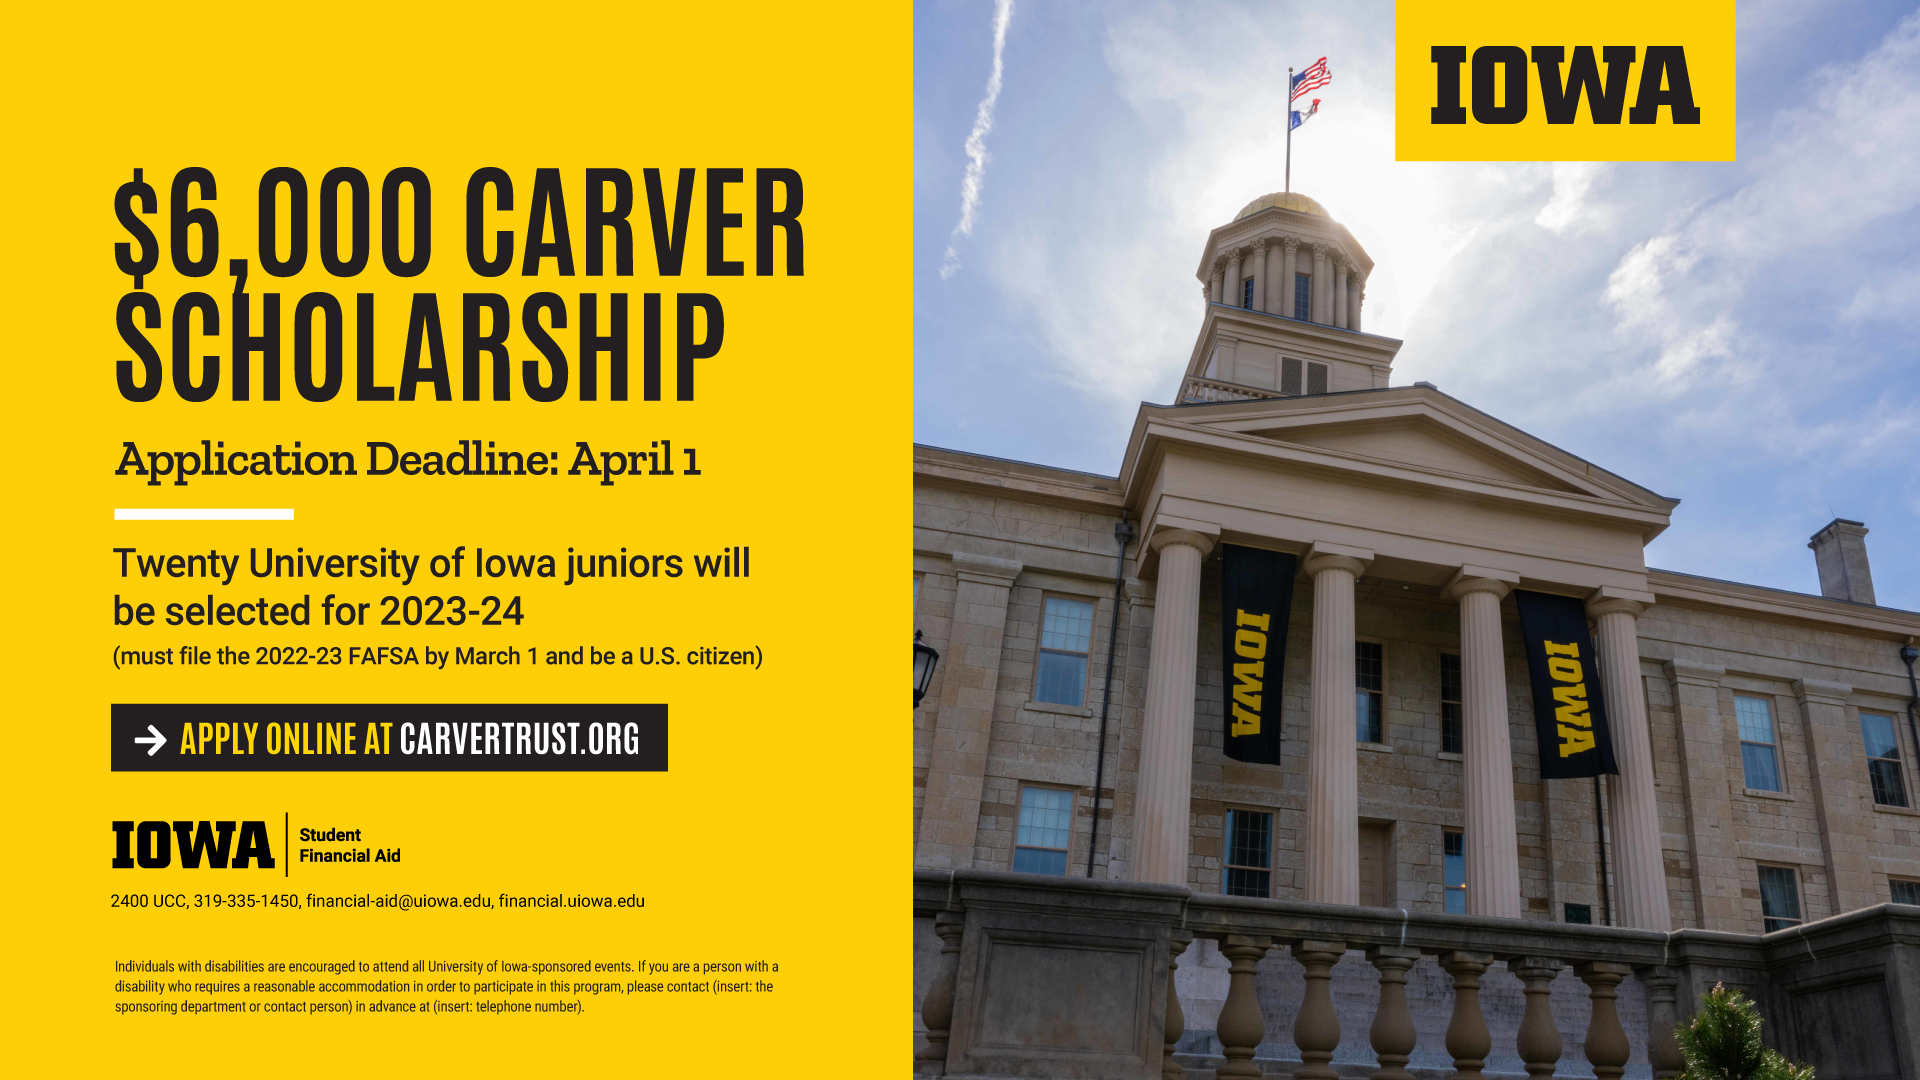 The Carver Scholarship is available to full-time, Iowa resident, students who will be starting their junior year next fall. Eligible students must have faced obstacles in their lives. If you know of a student who may qualify, please encourage them to file the 2023-2024 FAFSA by March 1 (if they haven’t already) and apply for the scholarship by April 1. More information about the scholarship is available at https://www.carvertrust.org/